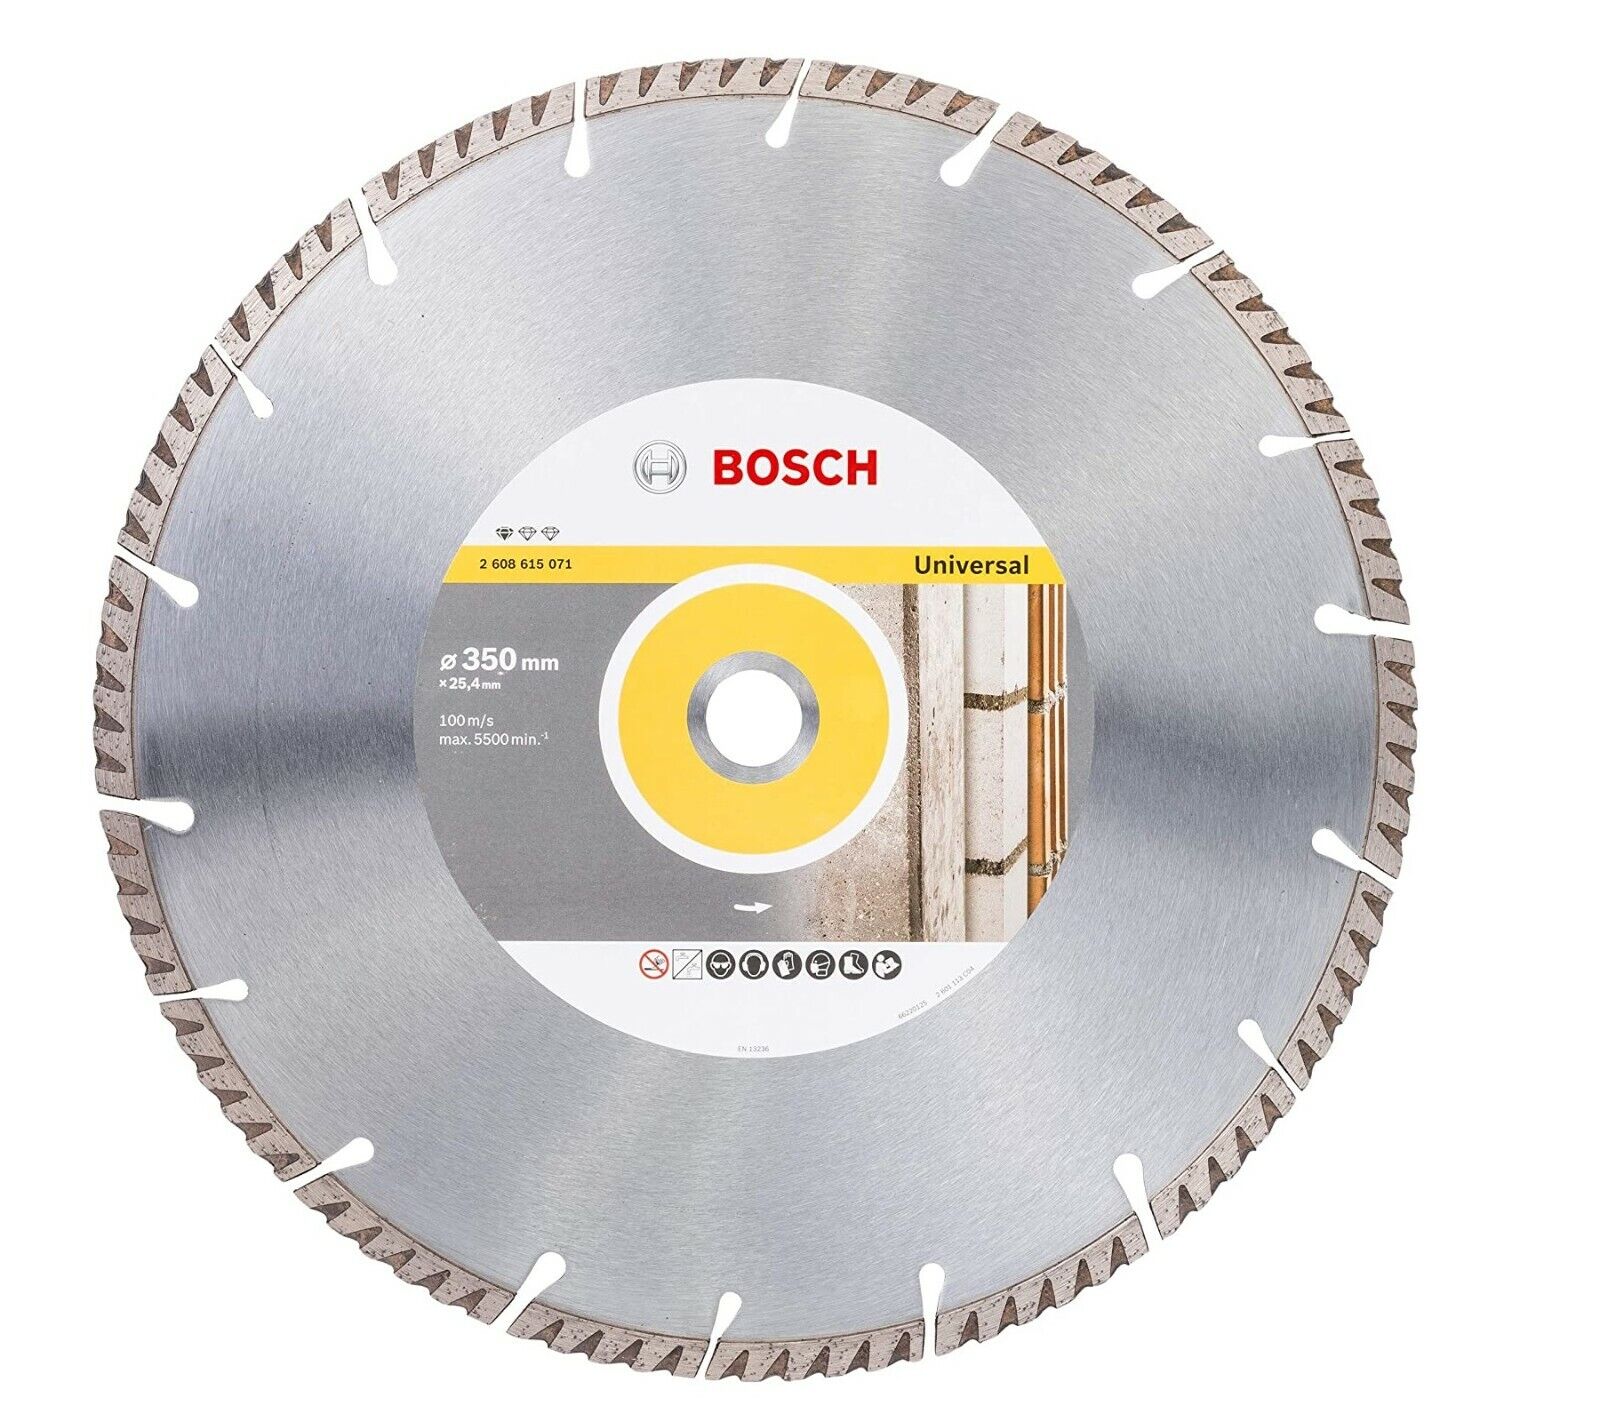 Bosch Standard for Universal 350 x 25,40 x 3,3, segmented 2608615071 Power Tool Services